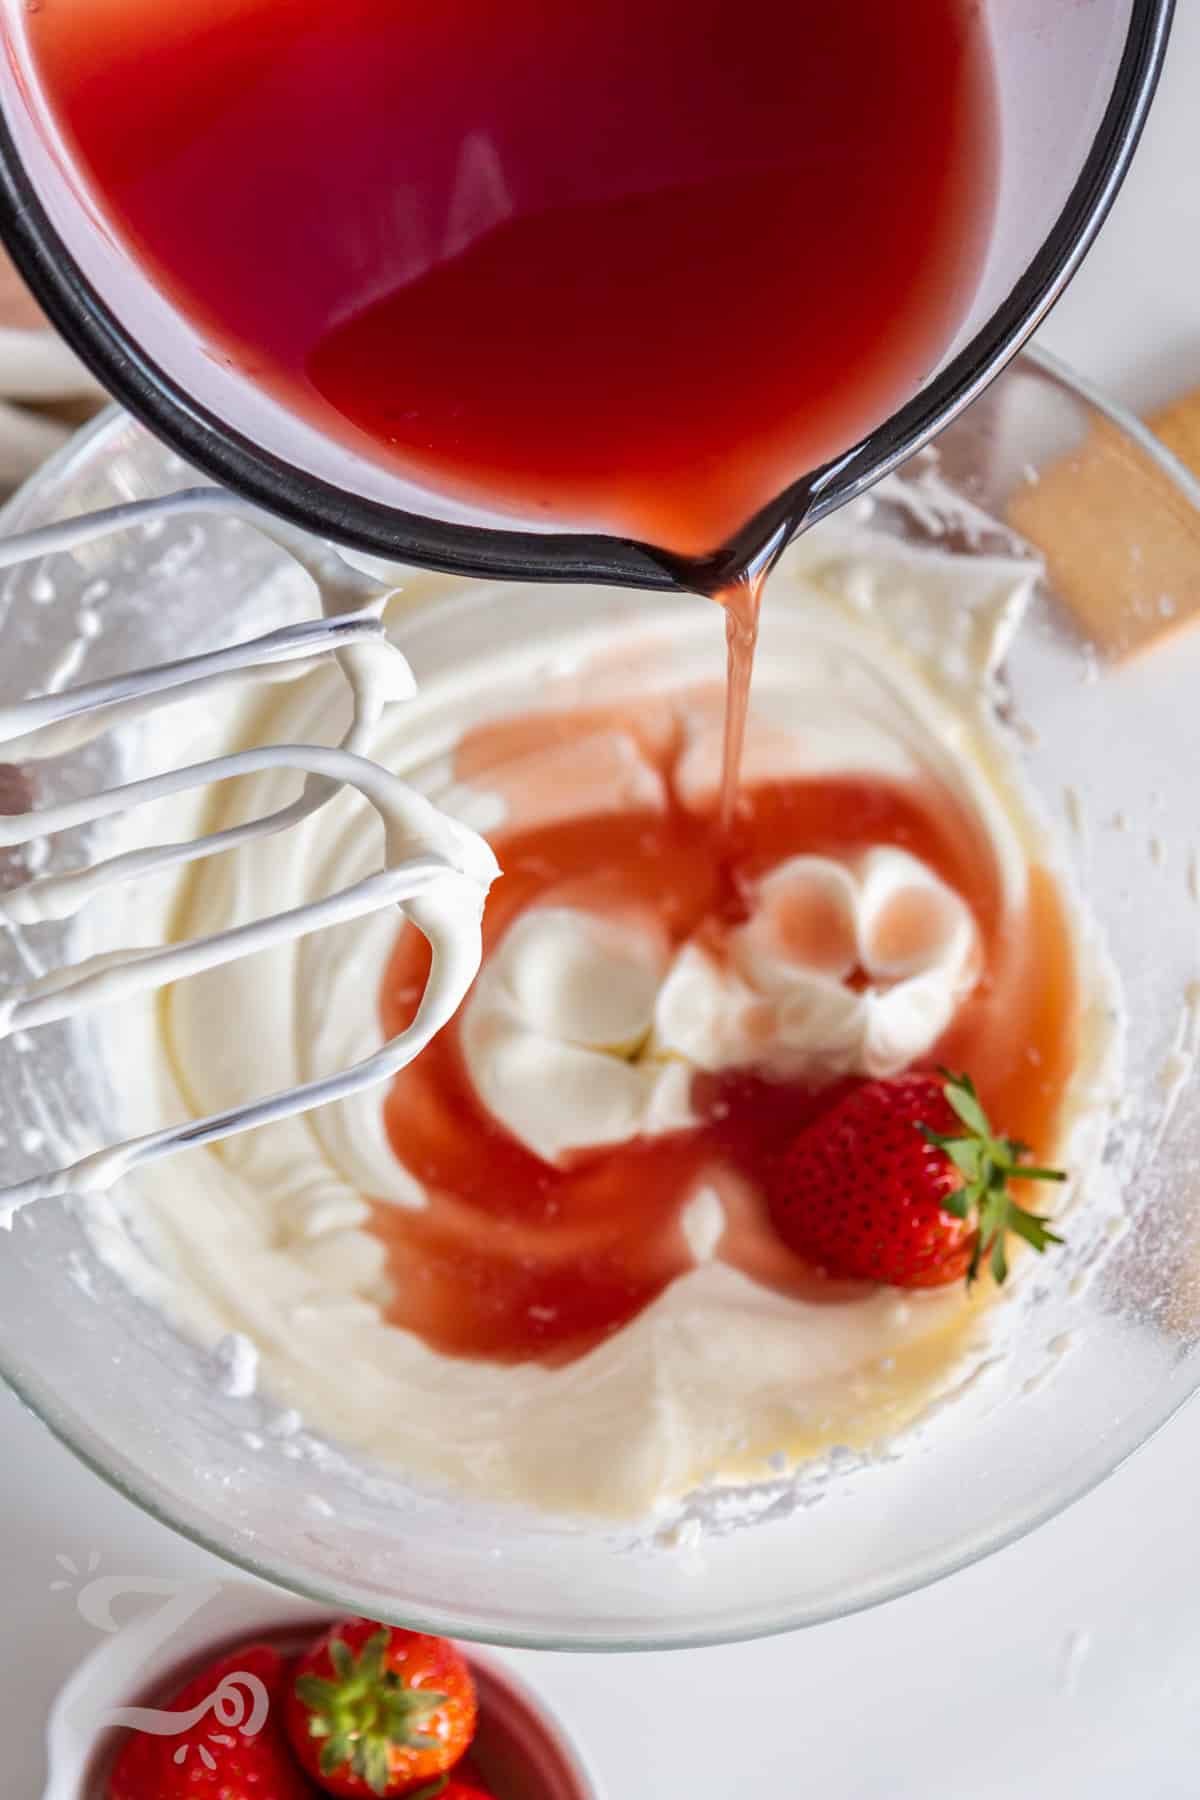 prepared strawberry gelatin being poured into the no bake strawberry cheesecake filling